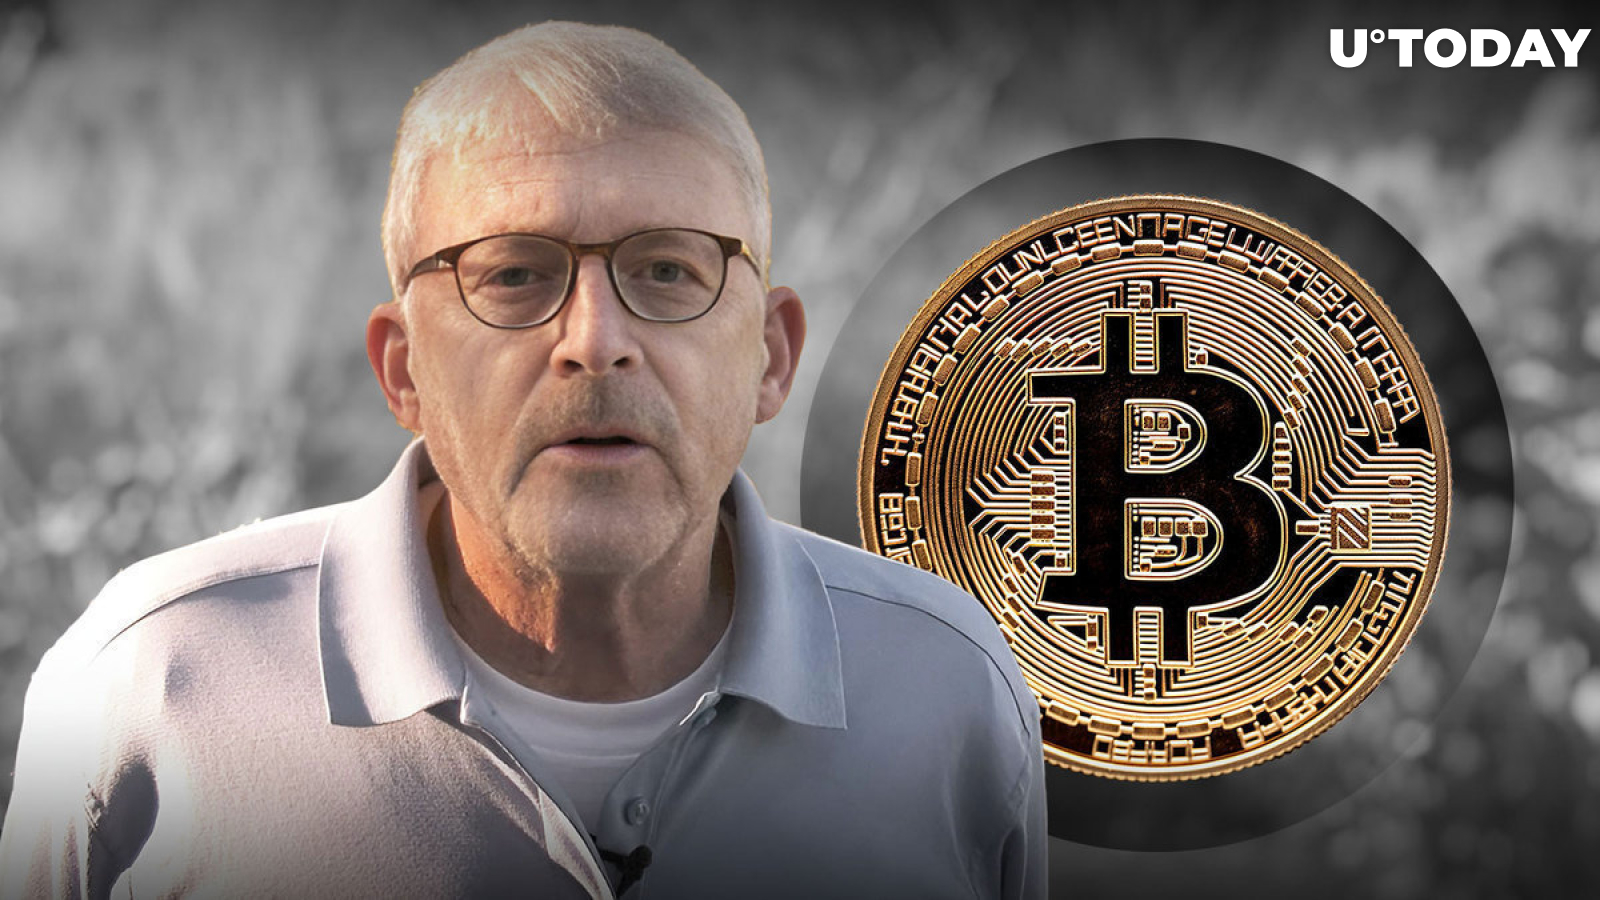 Bitcoin (BTC) Outshining Gold, Peter Brandt Shares Uncommon Take